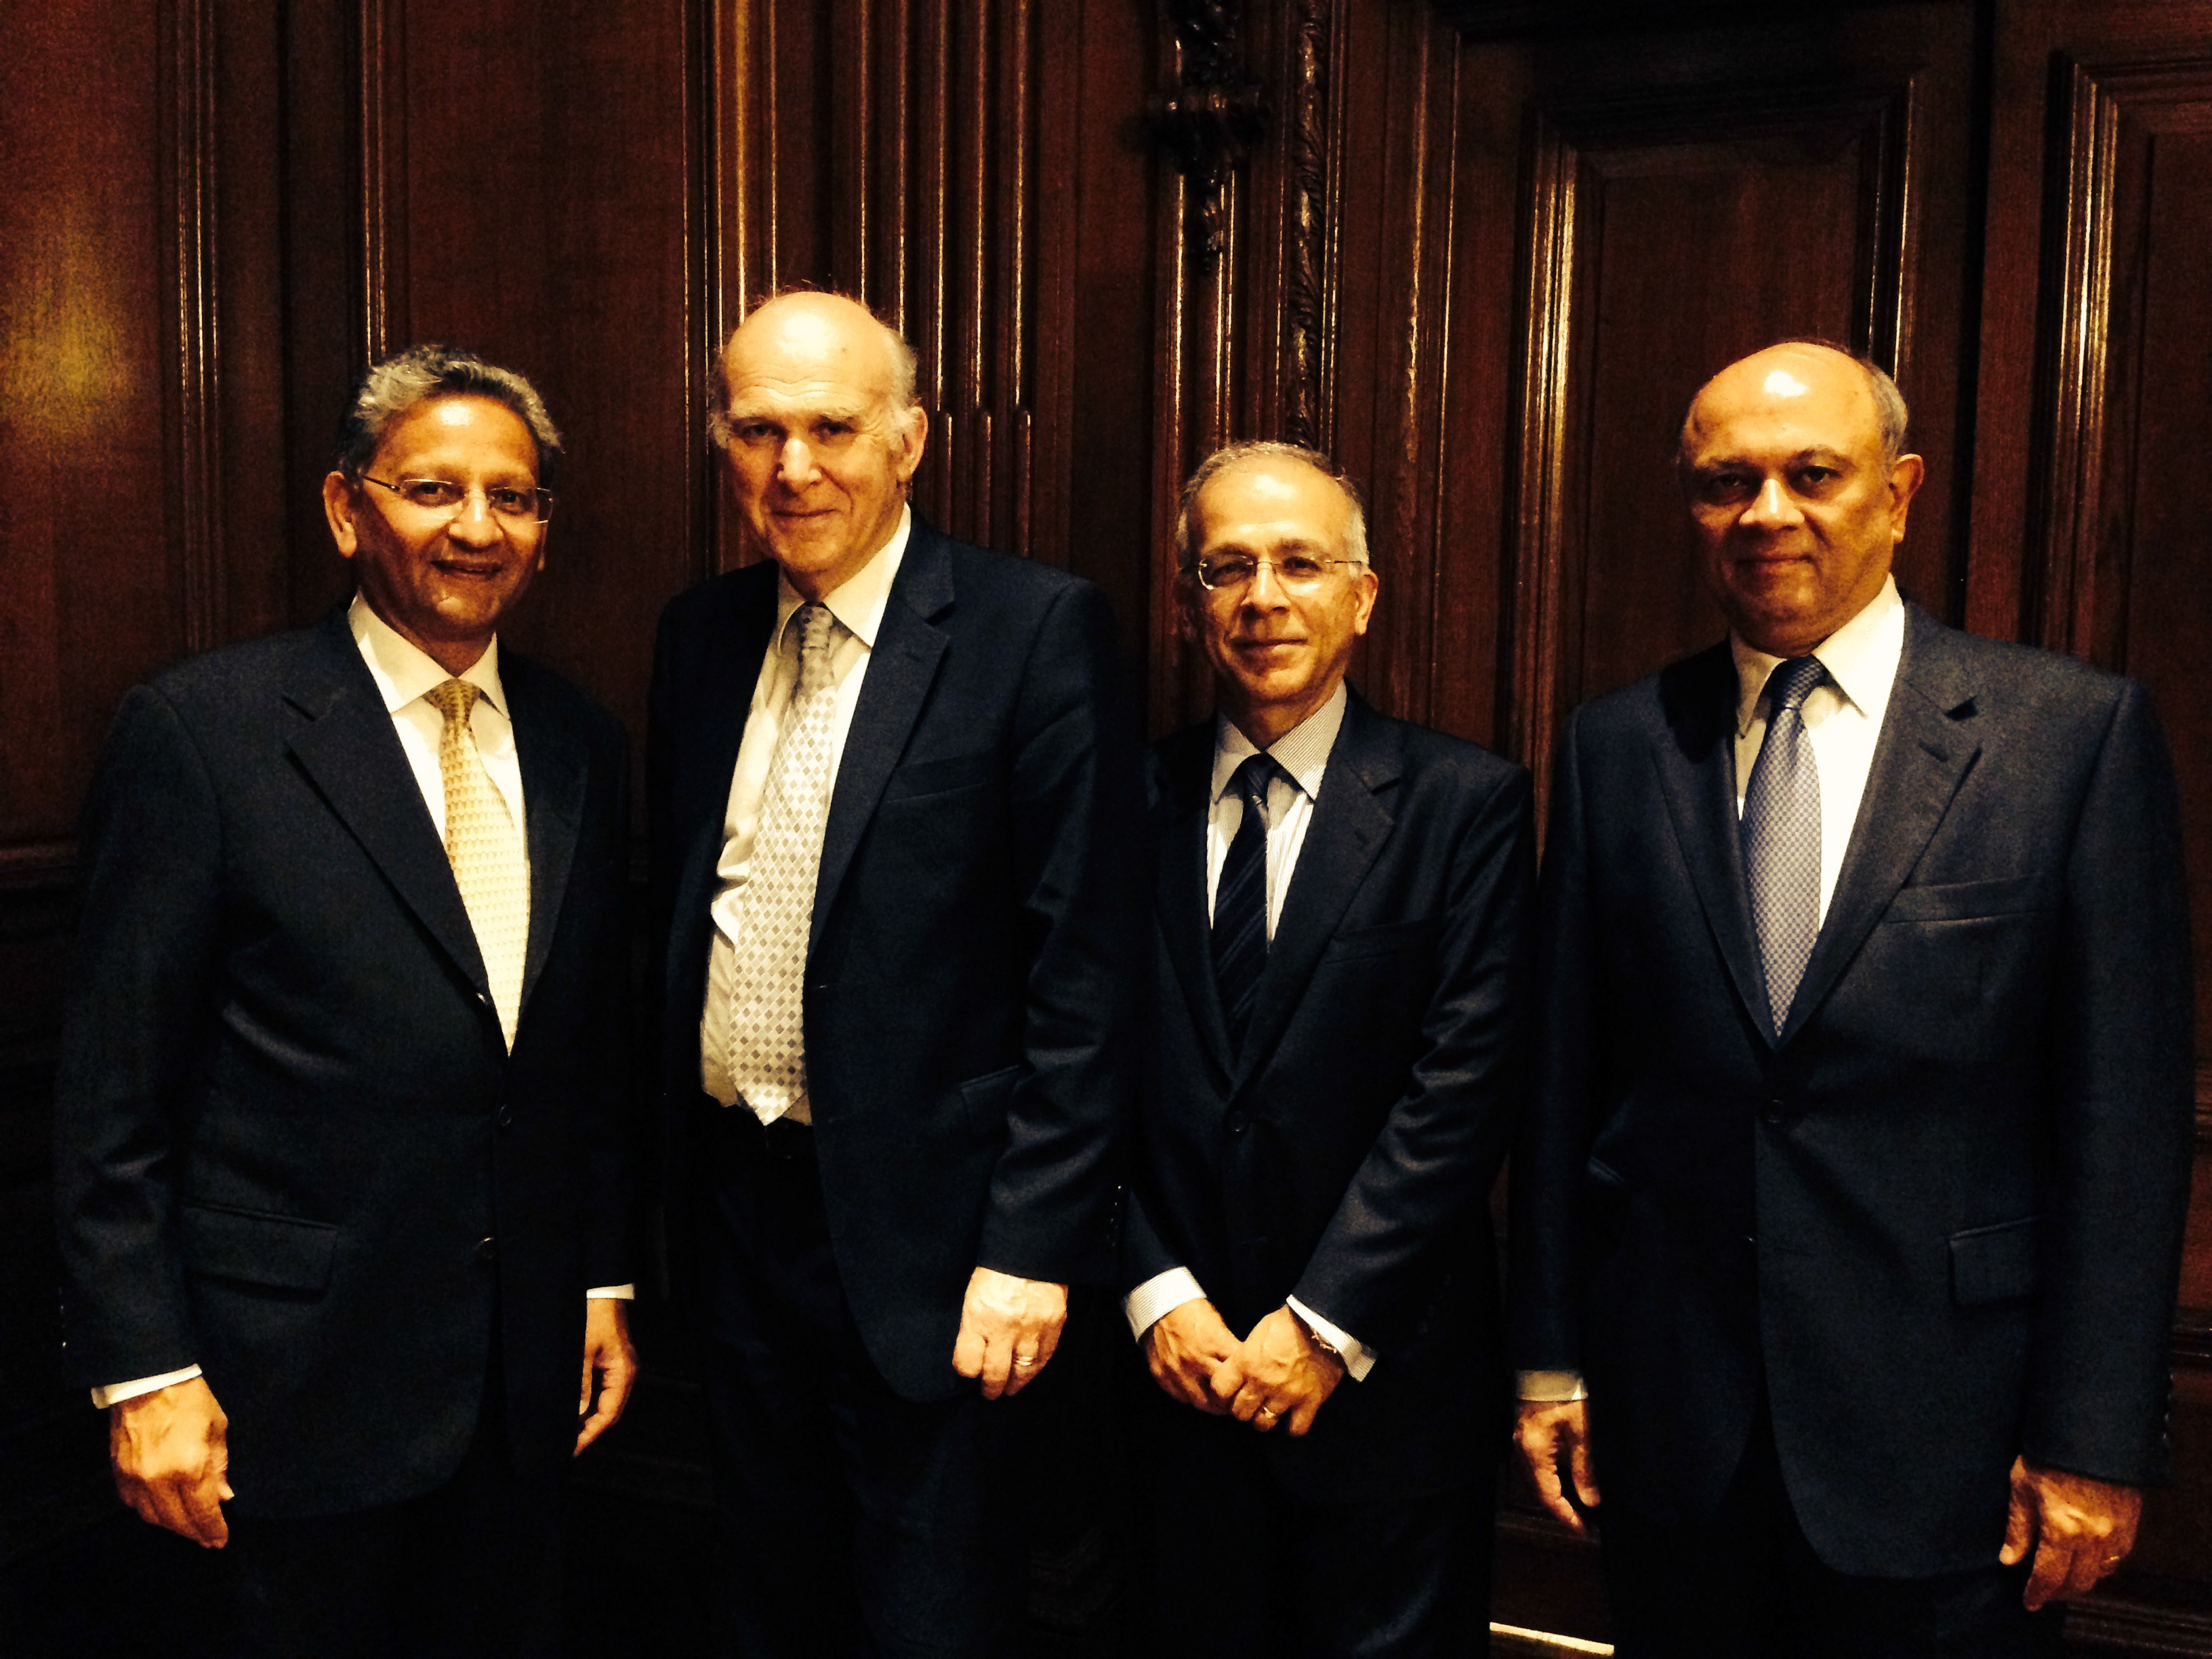 With UK Business Secretary of State Vince Cable